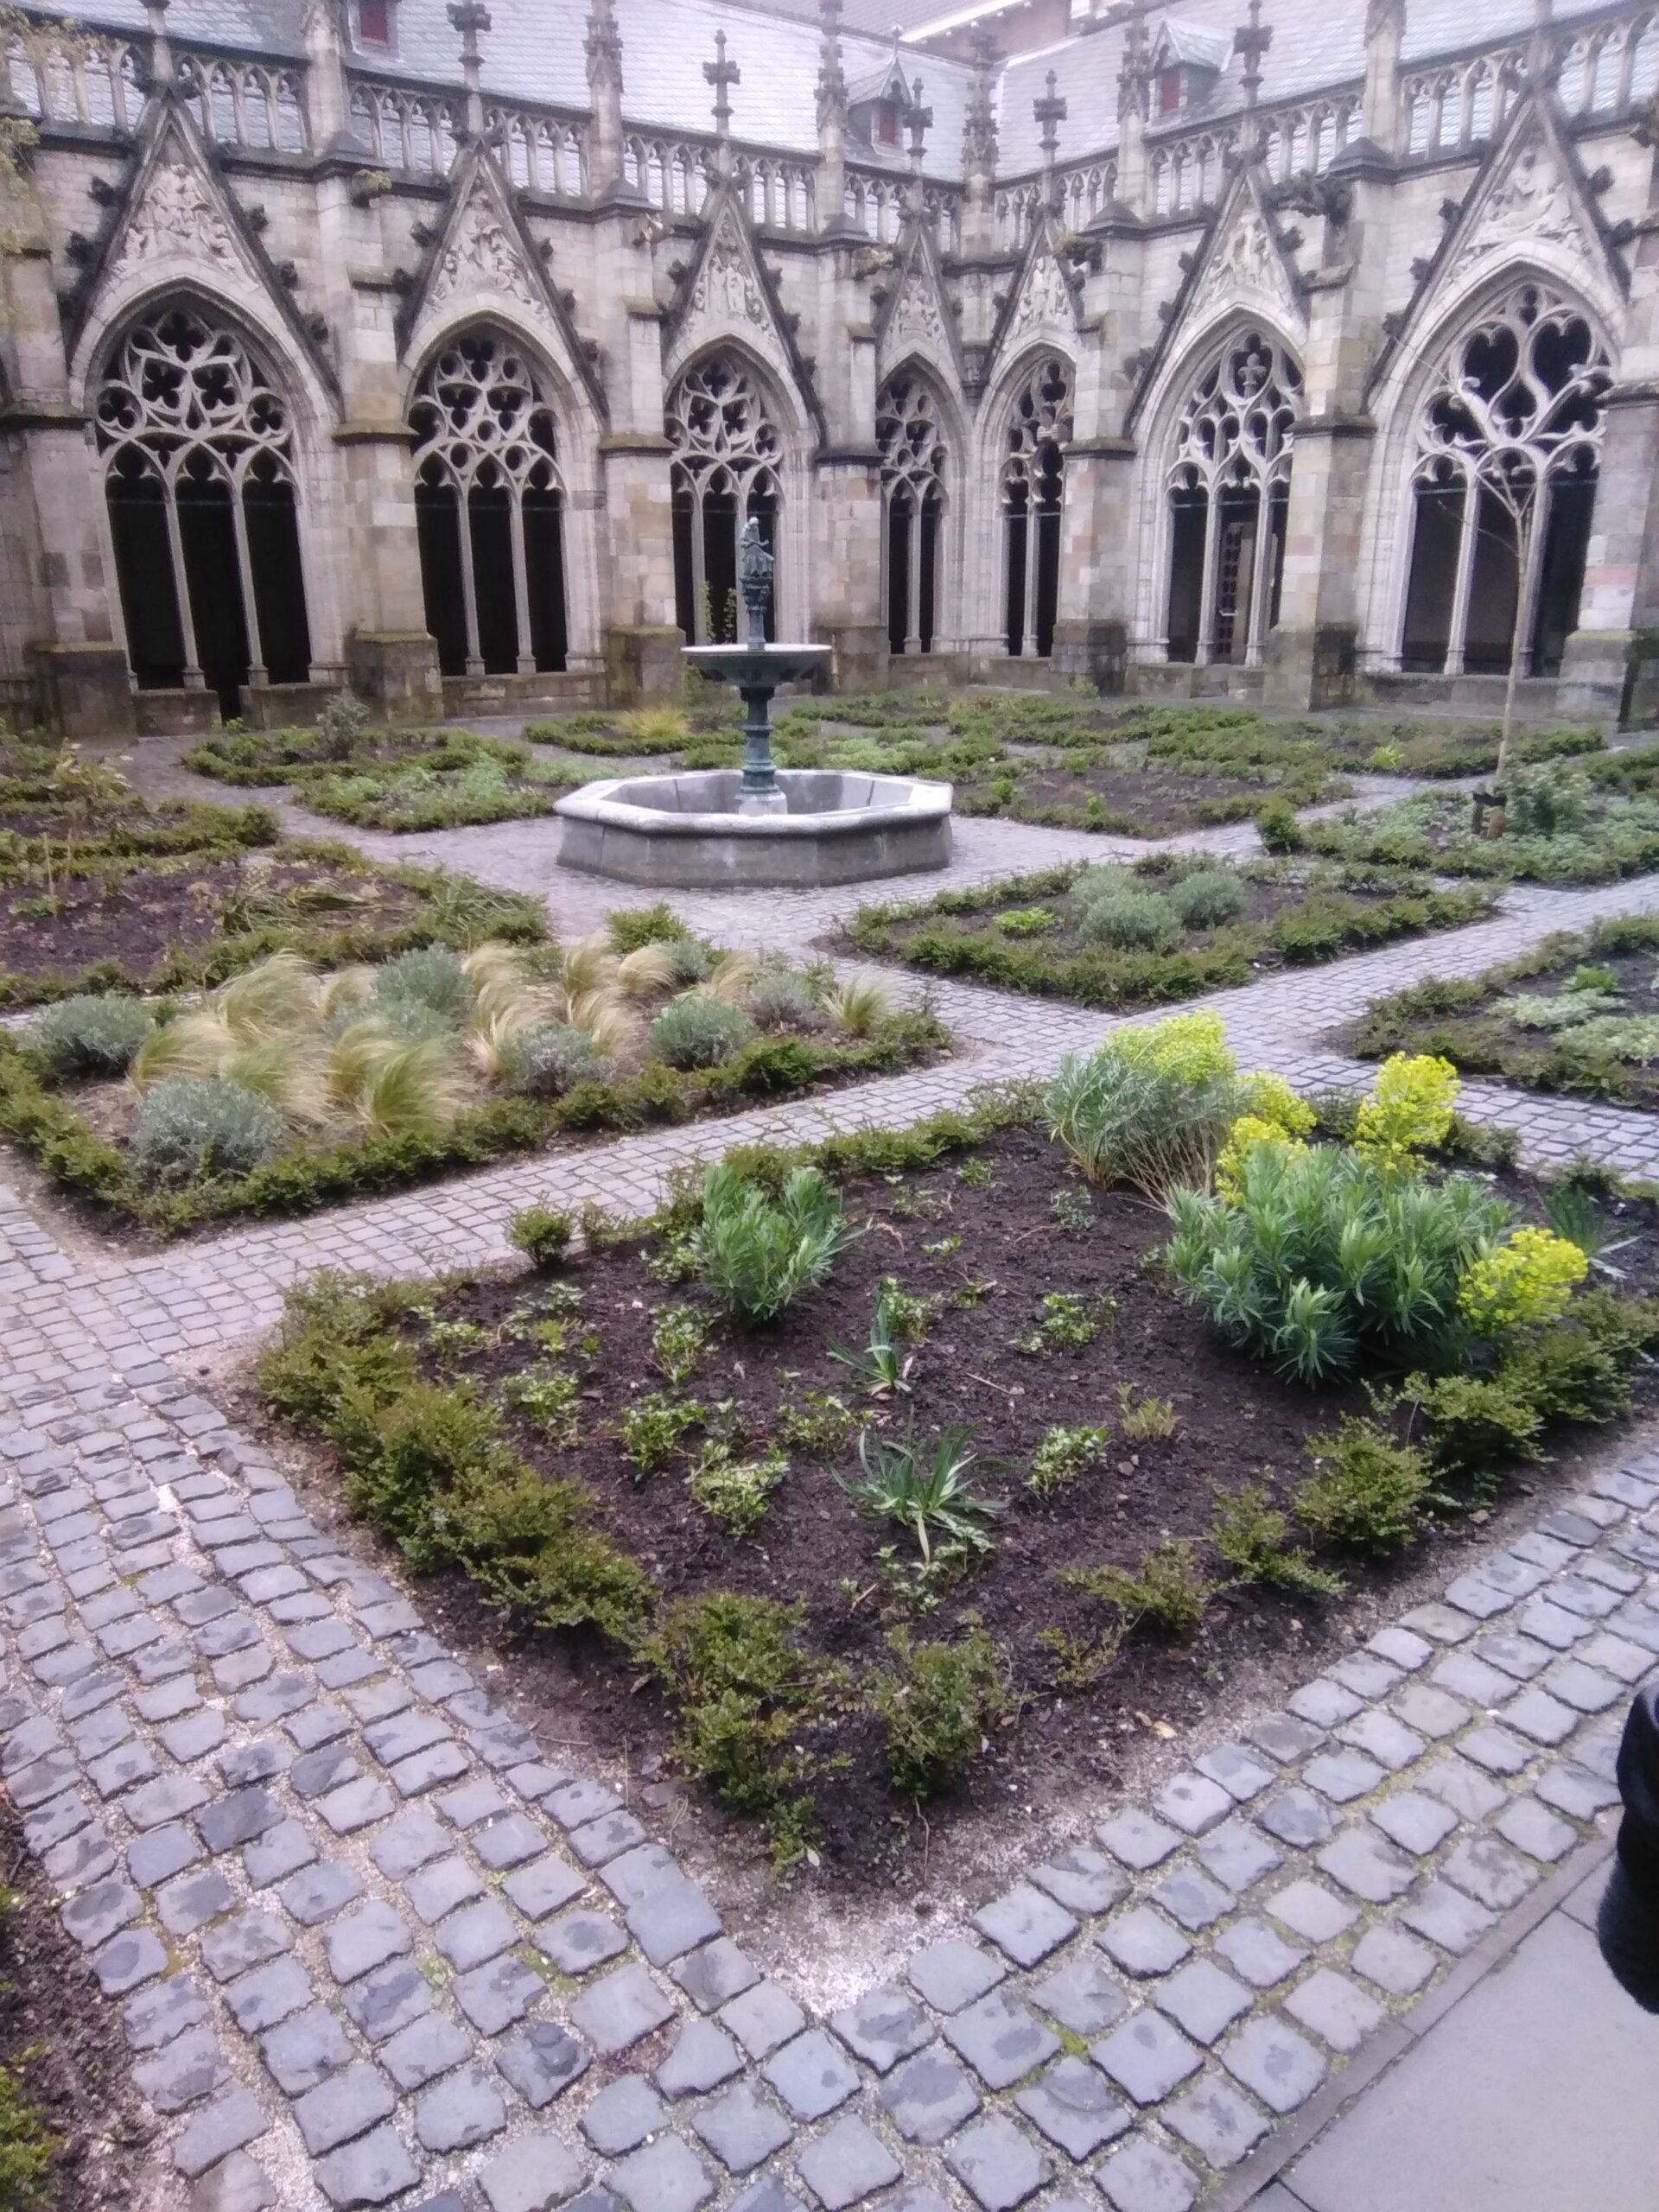 A picture of the interior herb garden of the Dom church, Utrecht, from our recent holiday.